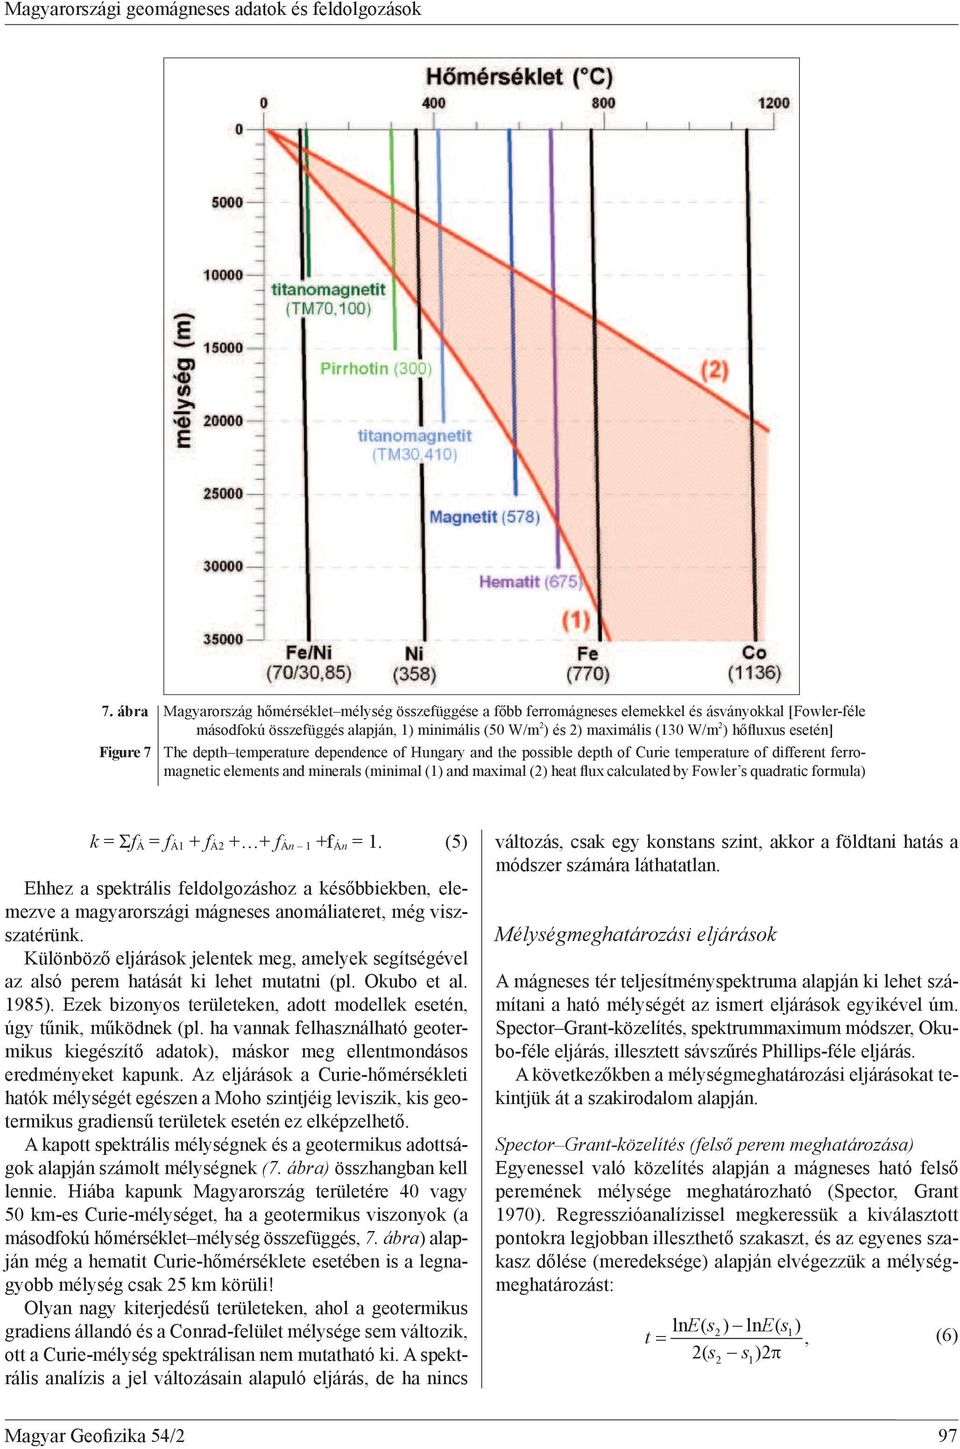 uxus esetén] Figure 7 The depth temperature dependence of Hungary and the possible depth of Curie temperature of different ferromagnetic elements and minerals (minimal (1) and maximal (2) heat ux